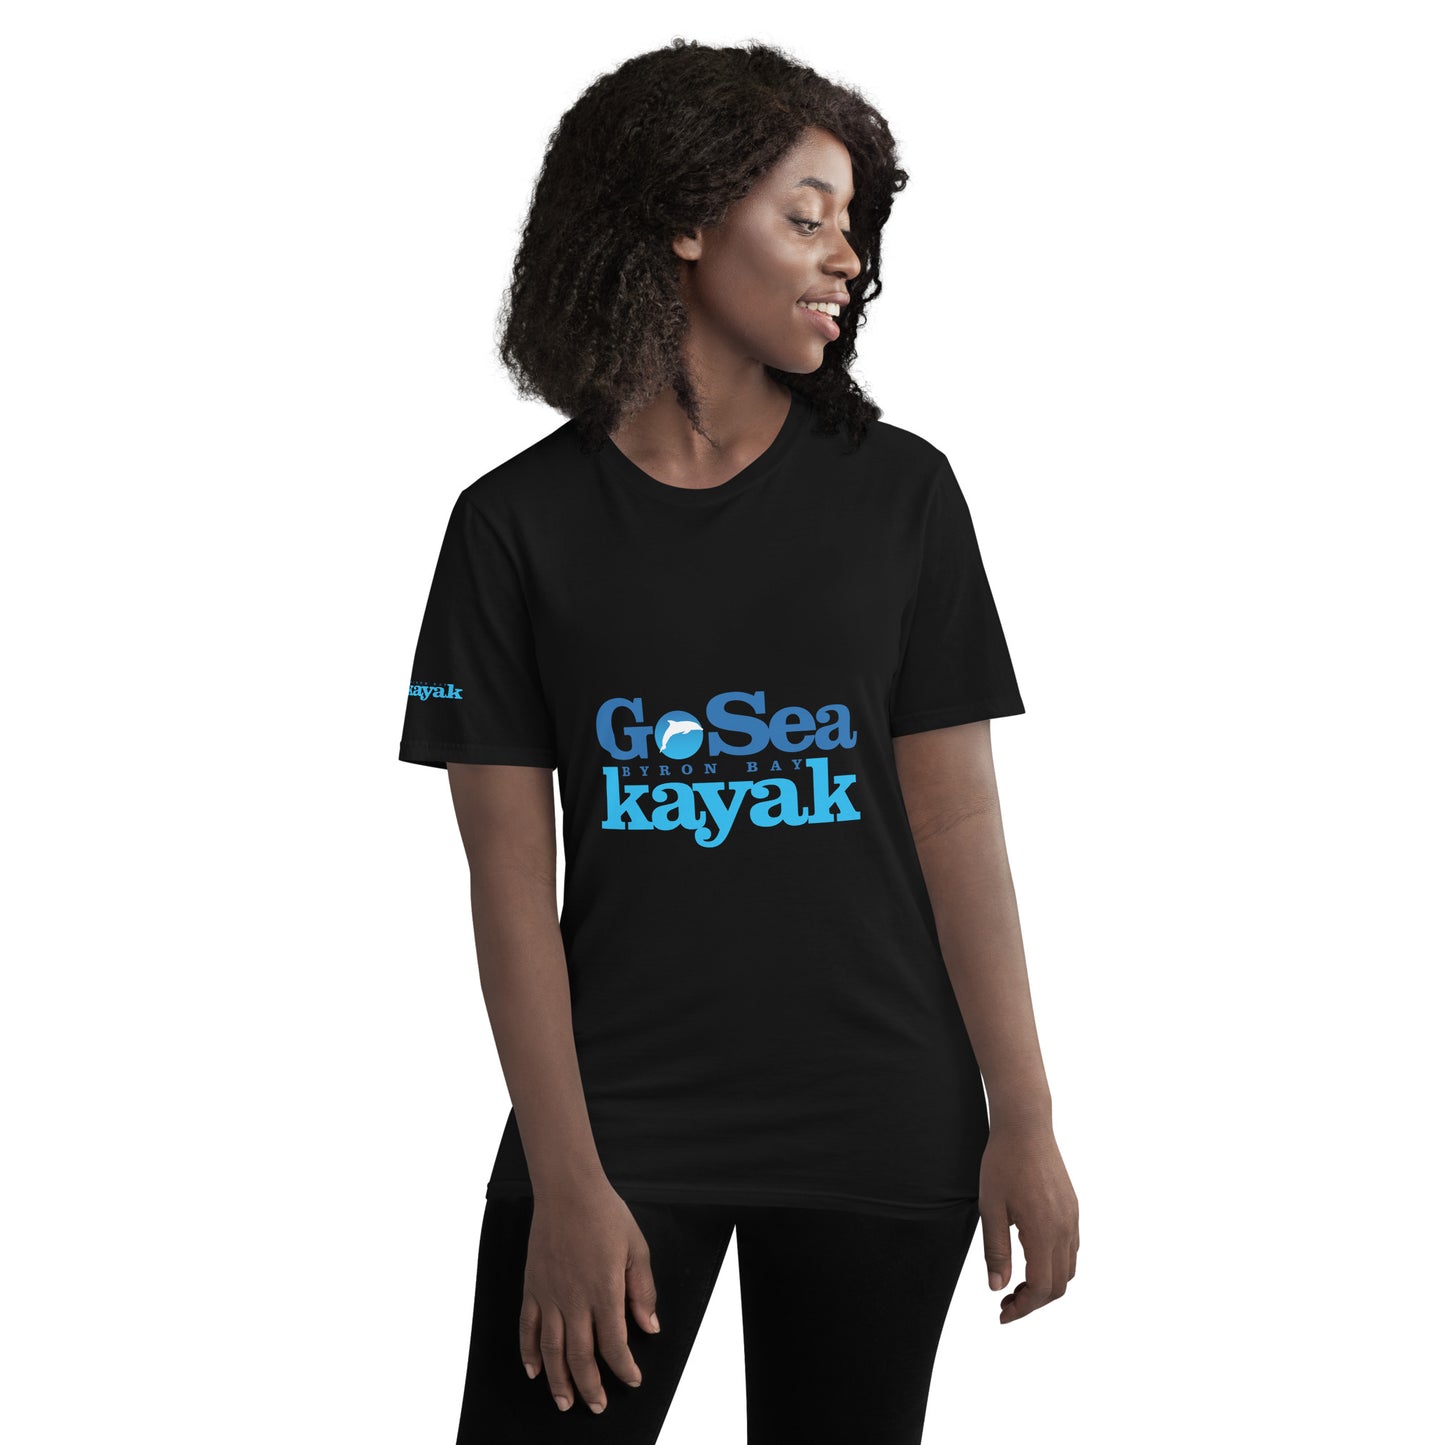  Unisex short sleeve T-shirt - Black - Front view on woman - With Go Sea Kayak logo on front and right sleve - Genuine Go Sea Kayak Byron Bay Merchandise 